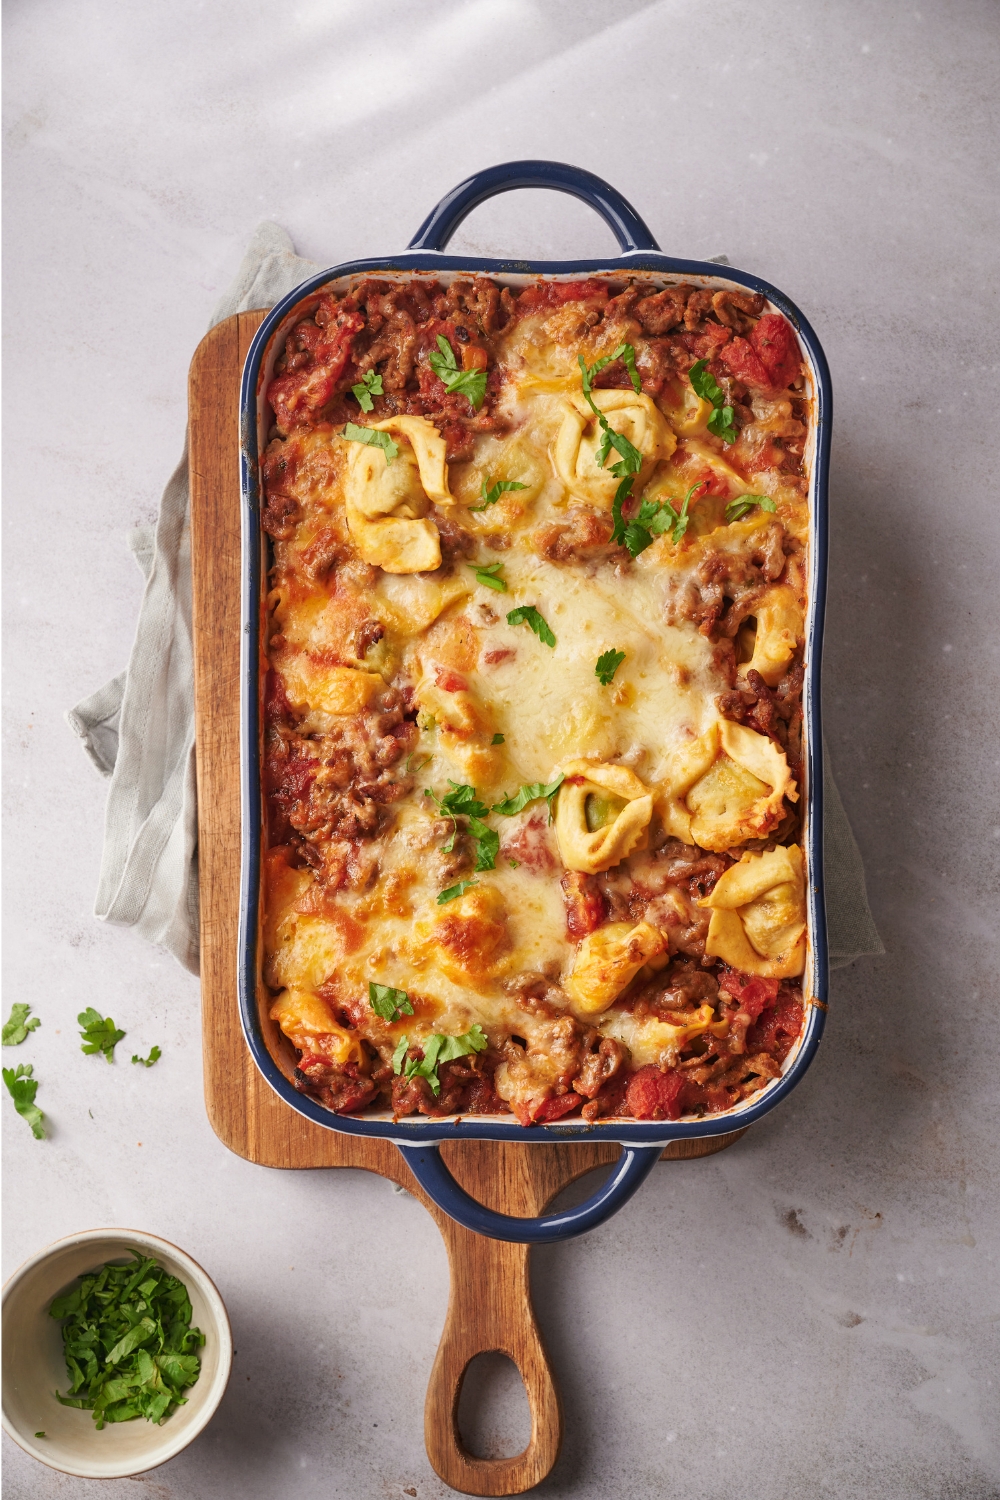 A baking dish filled with freshly baked tortellini casserole covered in melted cheese and garnished with fresh herbs.